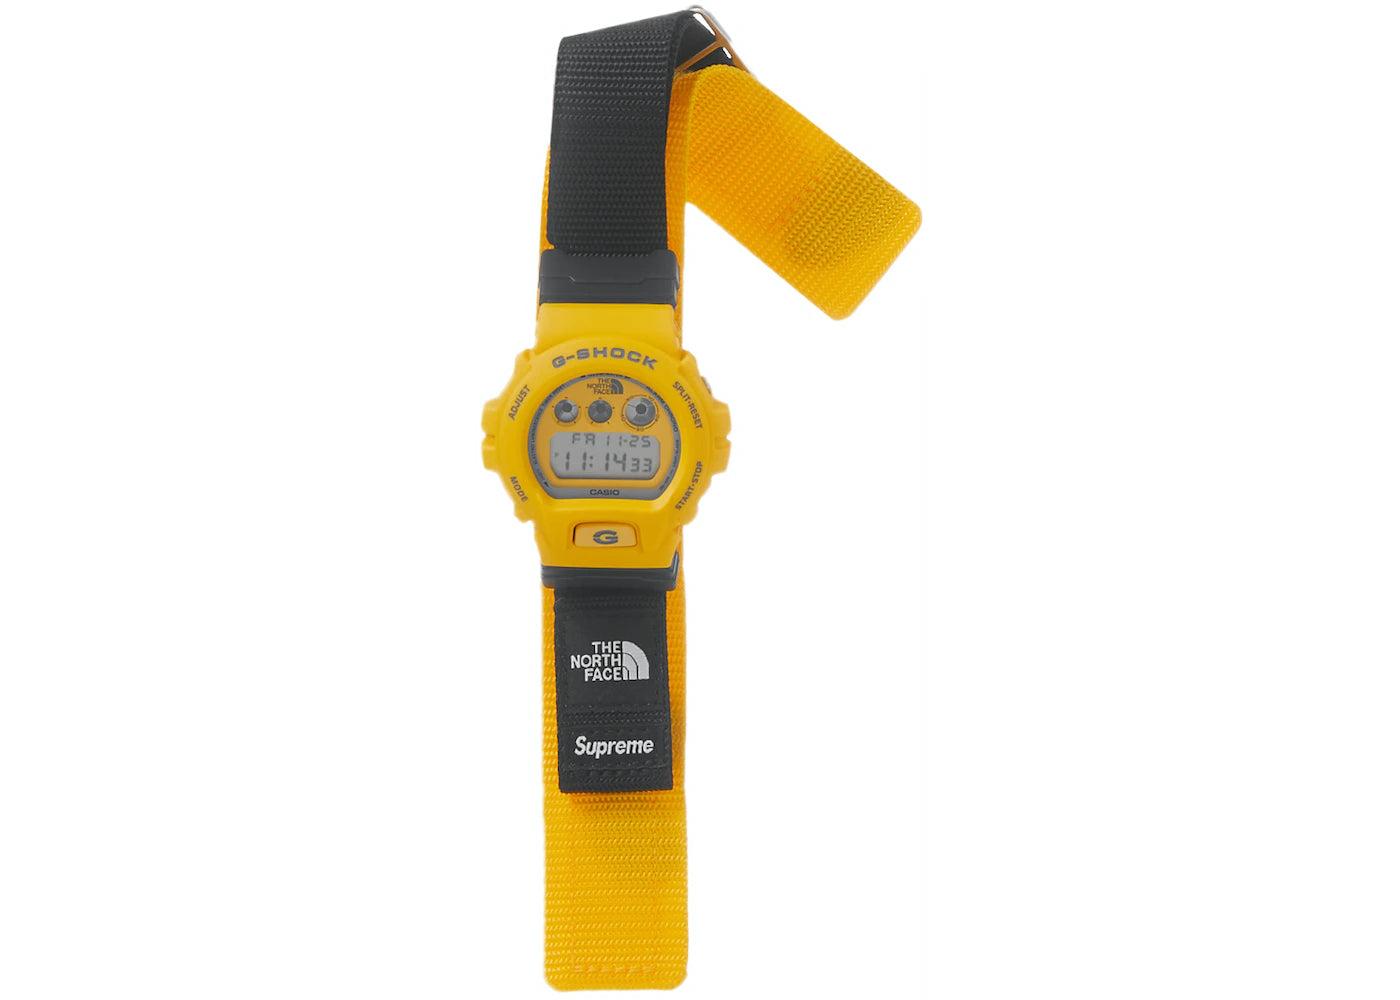 Supreme The North Face G-shock Watch Yellow in Black | Lyst